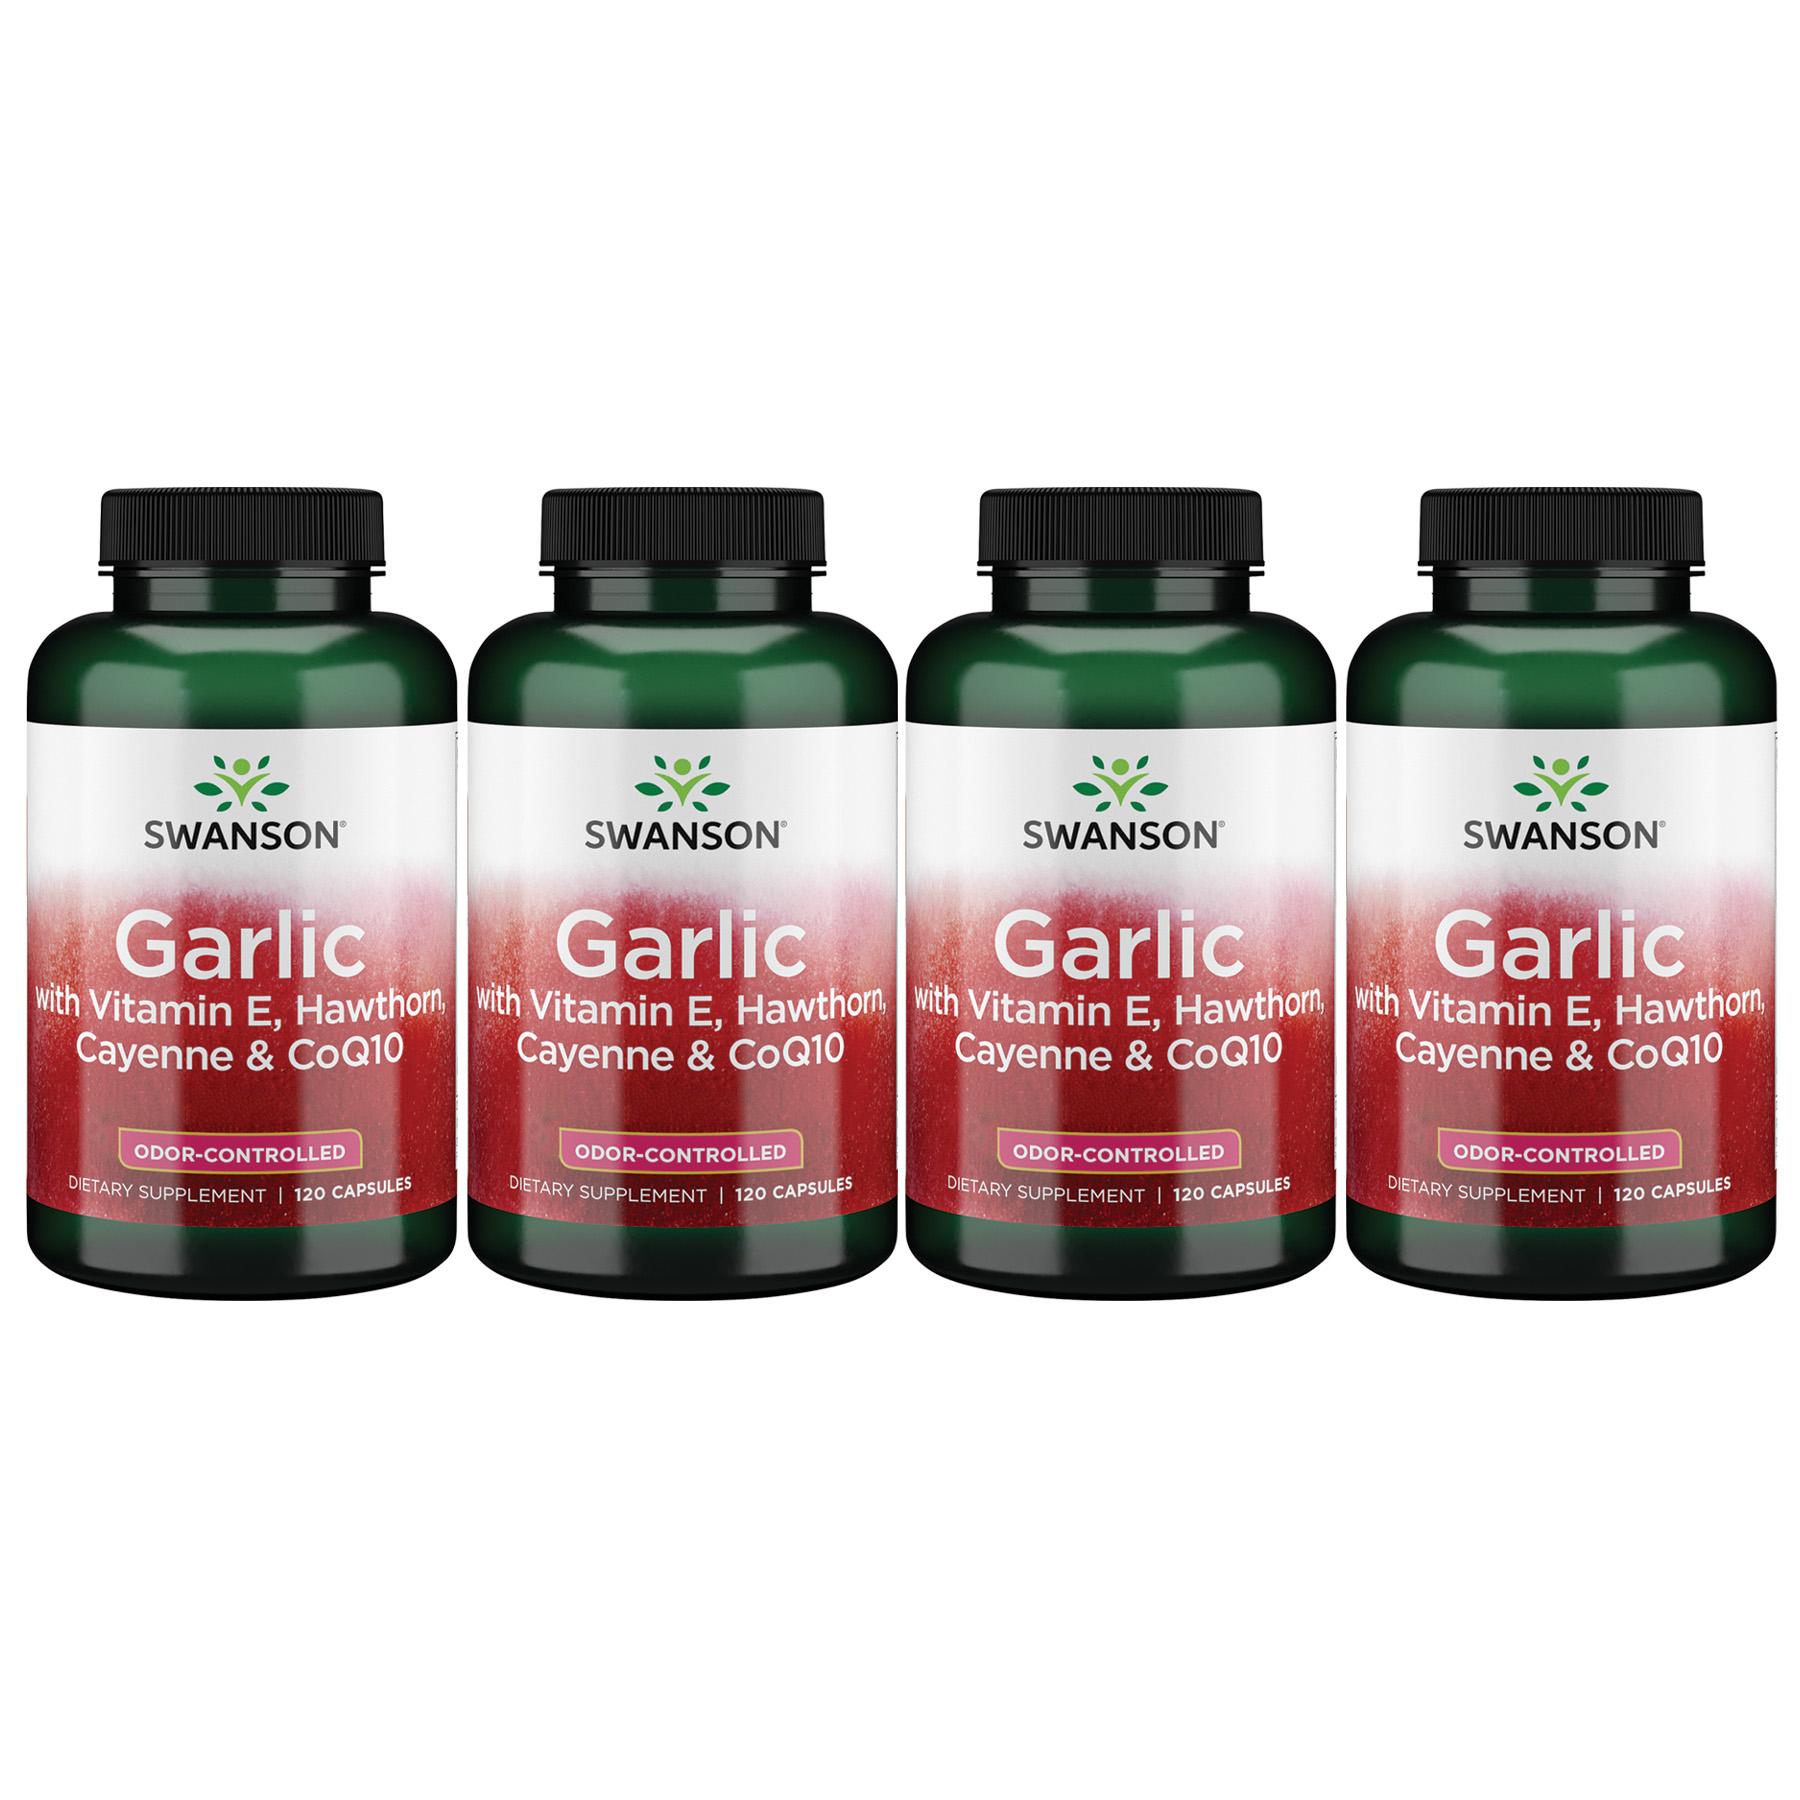 Swanson Best Garlic Supplements with Vitamin E, Hawthorn, Cayenne & Coq10 - Odor-Controlled 4 Pack 120 Caps